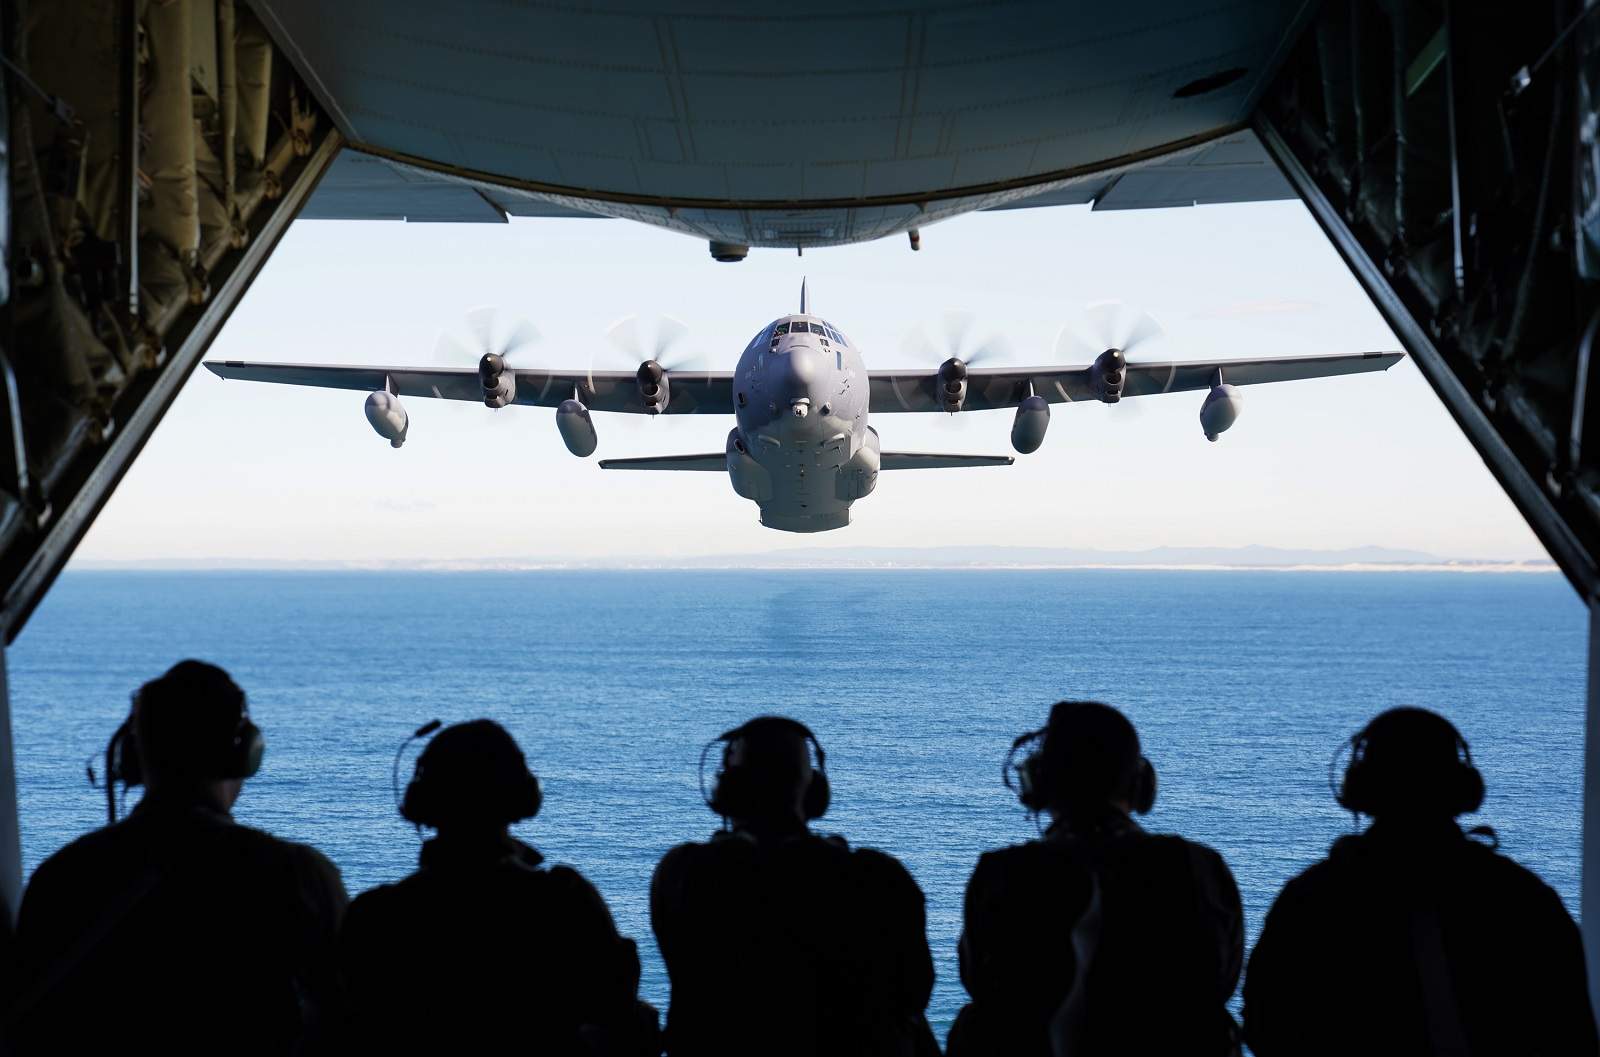 US and Royal Australian Air Force personnel observe an MC-130J Air Commando II flying in formation off the coast of New South Wales, Australia, 3 July 2021 (Joshua Thompson/US Air Force/Flickr)